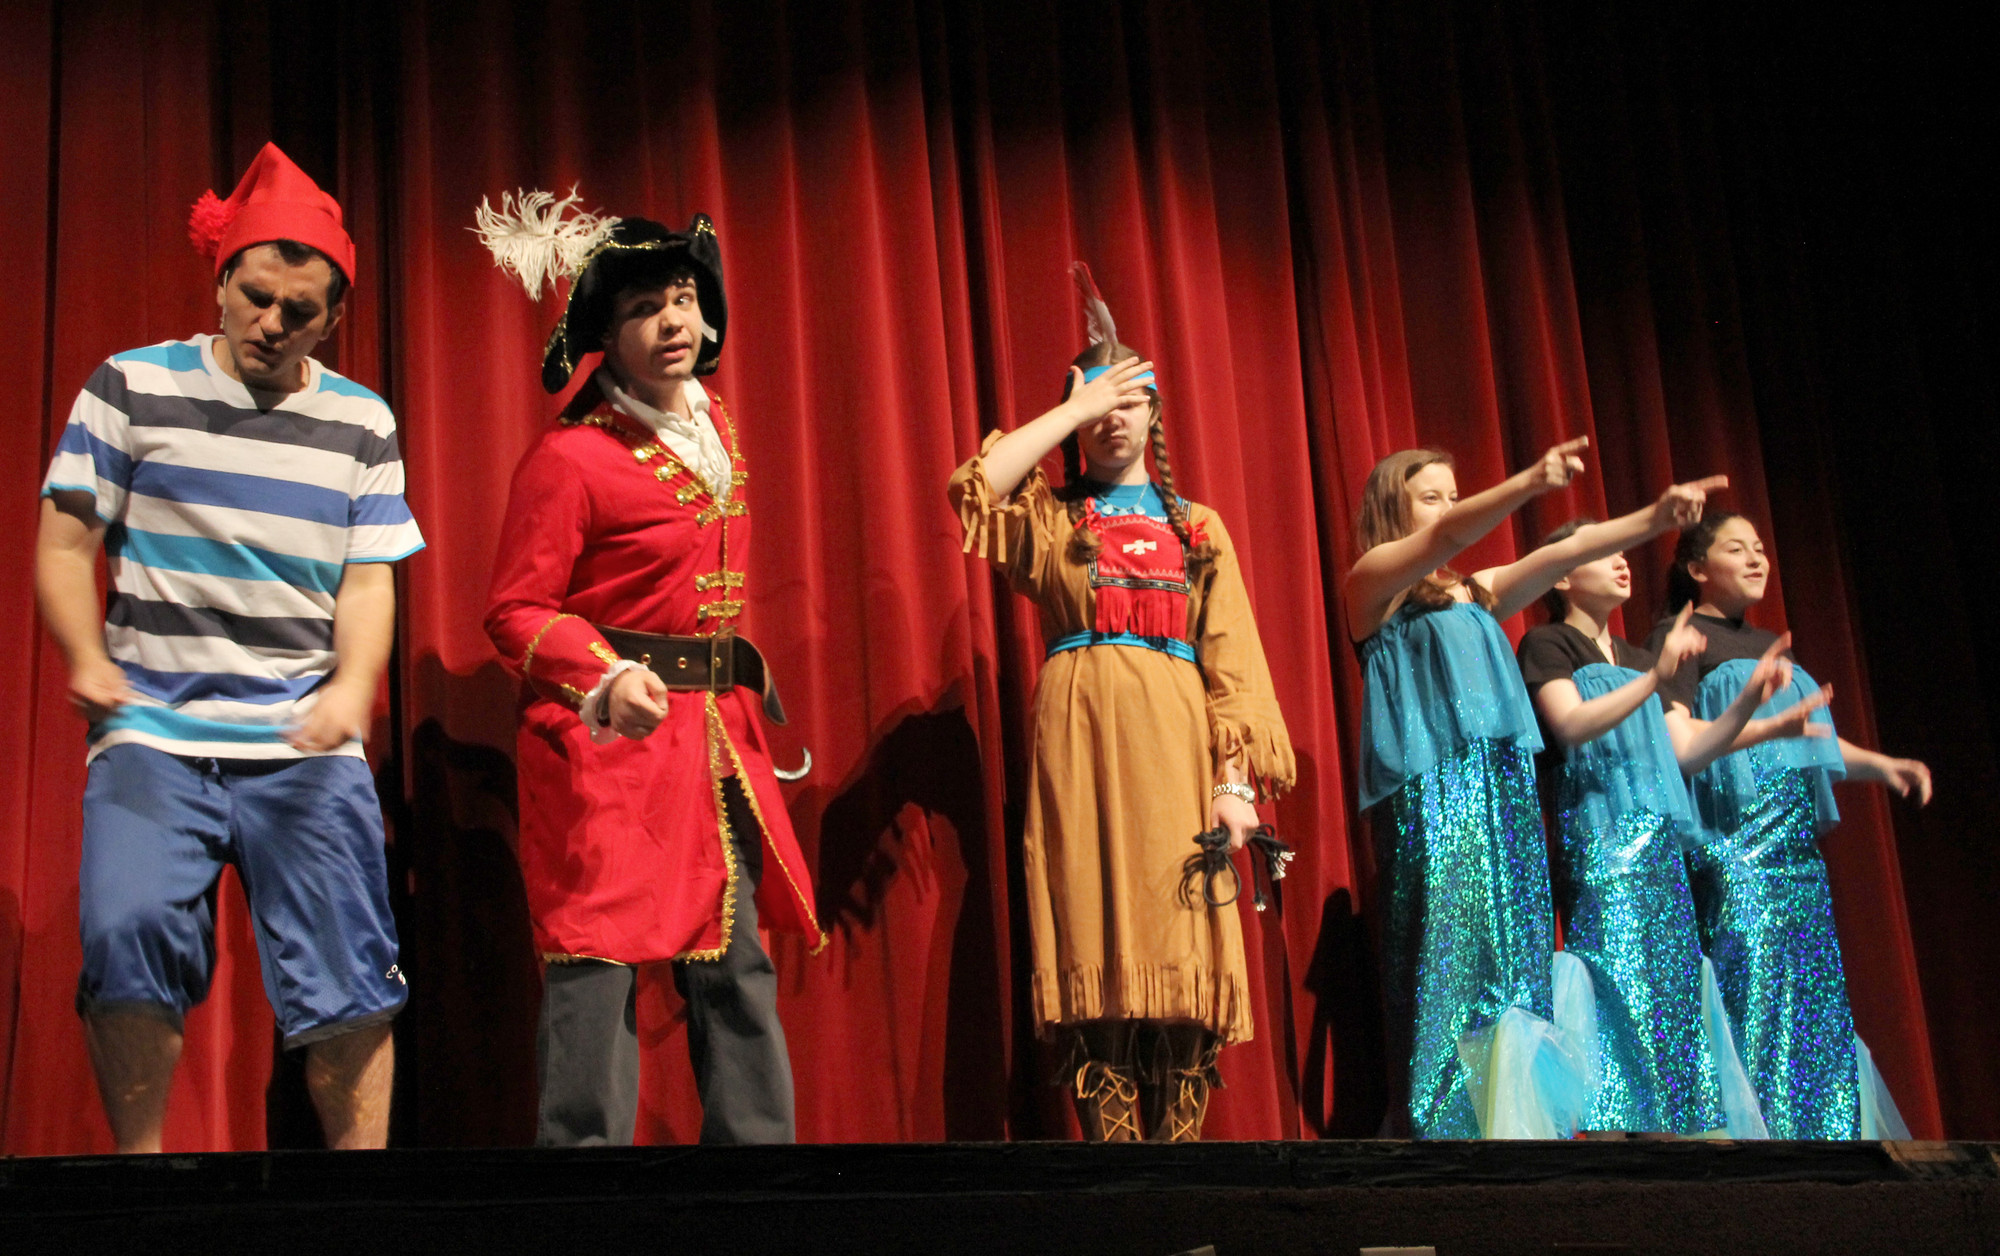 Smee (Rick Cisario) left, and Hook (Bryan Nesdill) who helped write the play, in a scene called “The Capture of Tiger Lily.” They are pictured on stage with Tiger Lily (Kyra Ganzi-Barnes) and the Mermaid singers.